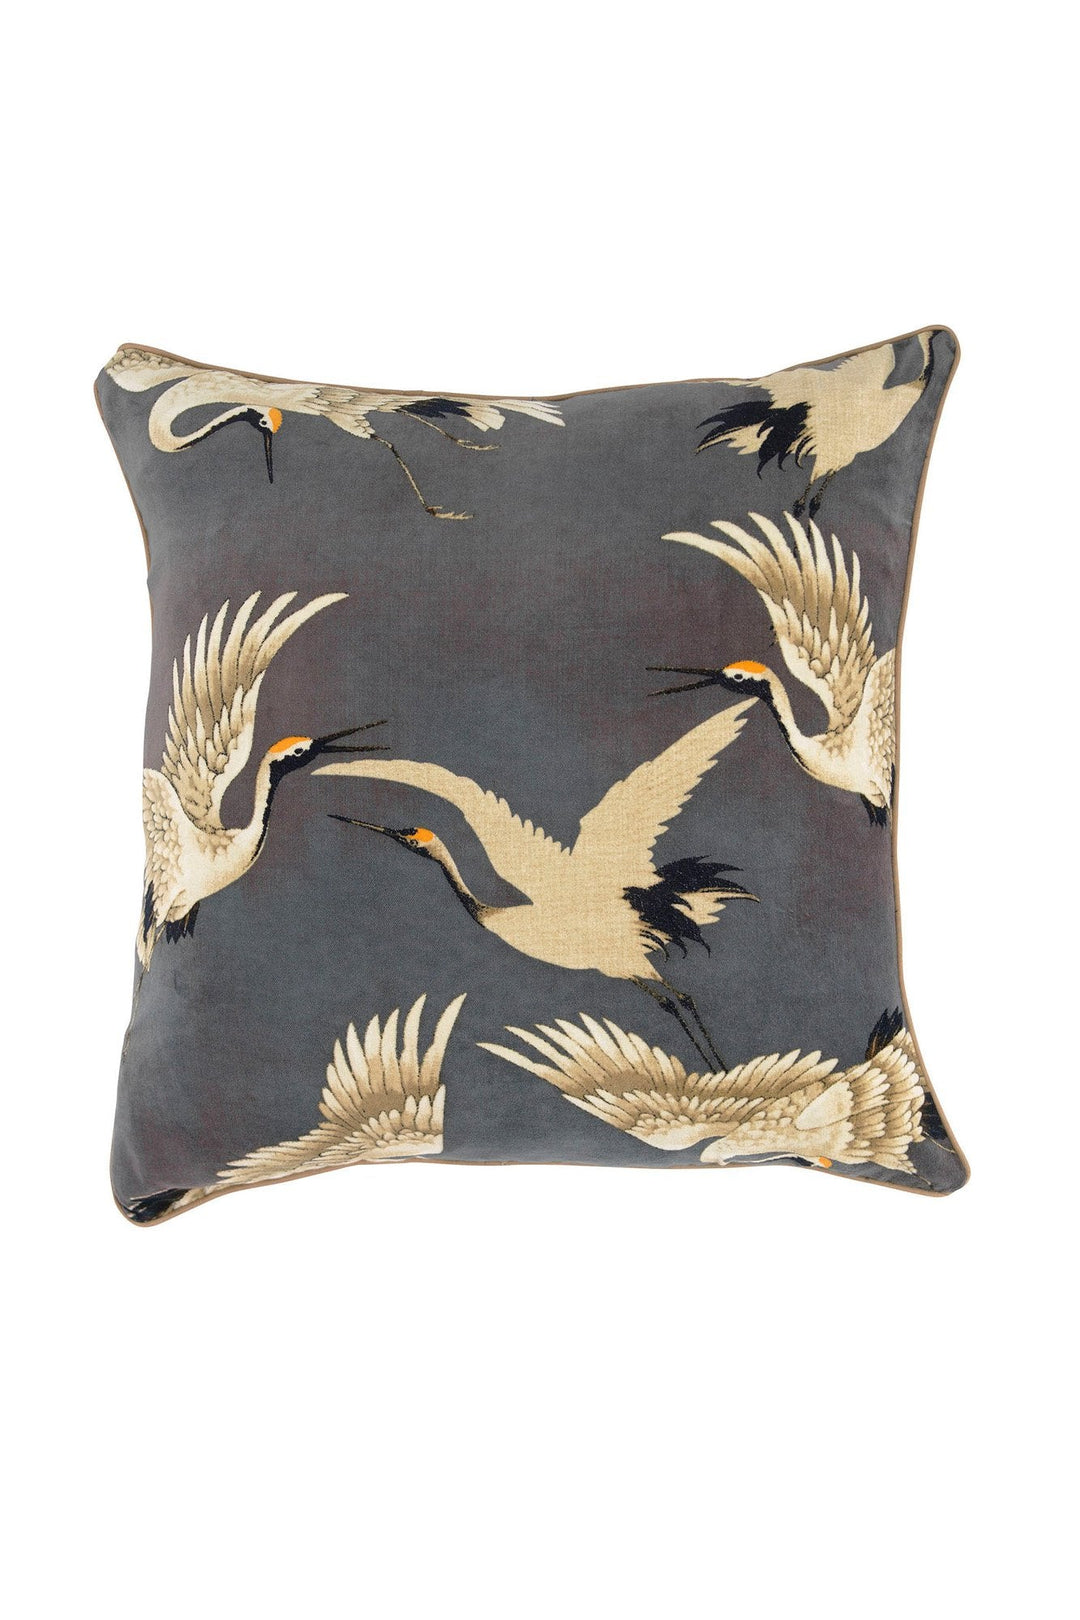 One Hundred Stars Stork Slate Grey Square Velvet Cushion- Stork Slate Grey Square Velvet Cushion is perfect for anyone looking for something chic, stylish and in vogue!